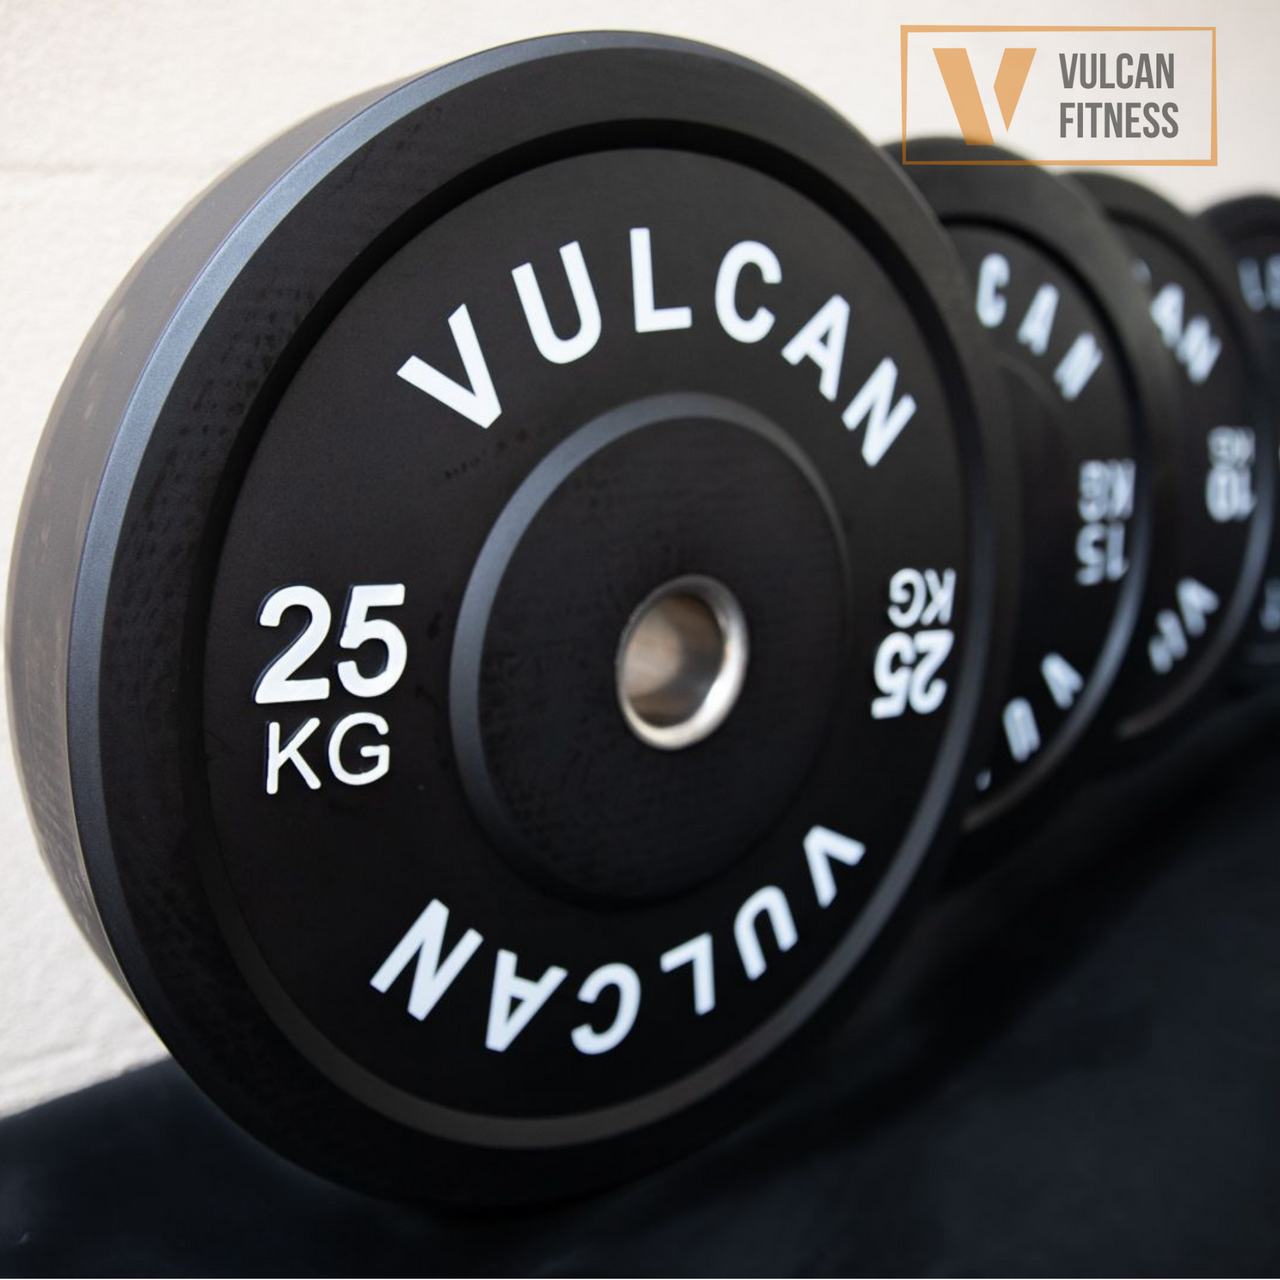 VULCAN Commercial Power Rack, Olympic Barbell, 100kg Black Bumper Weight Plates & Adjustable Bench | IN STOCK